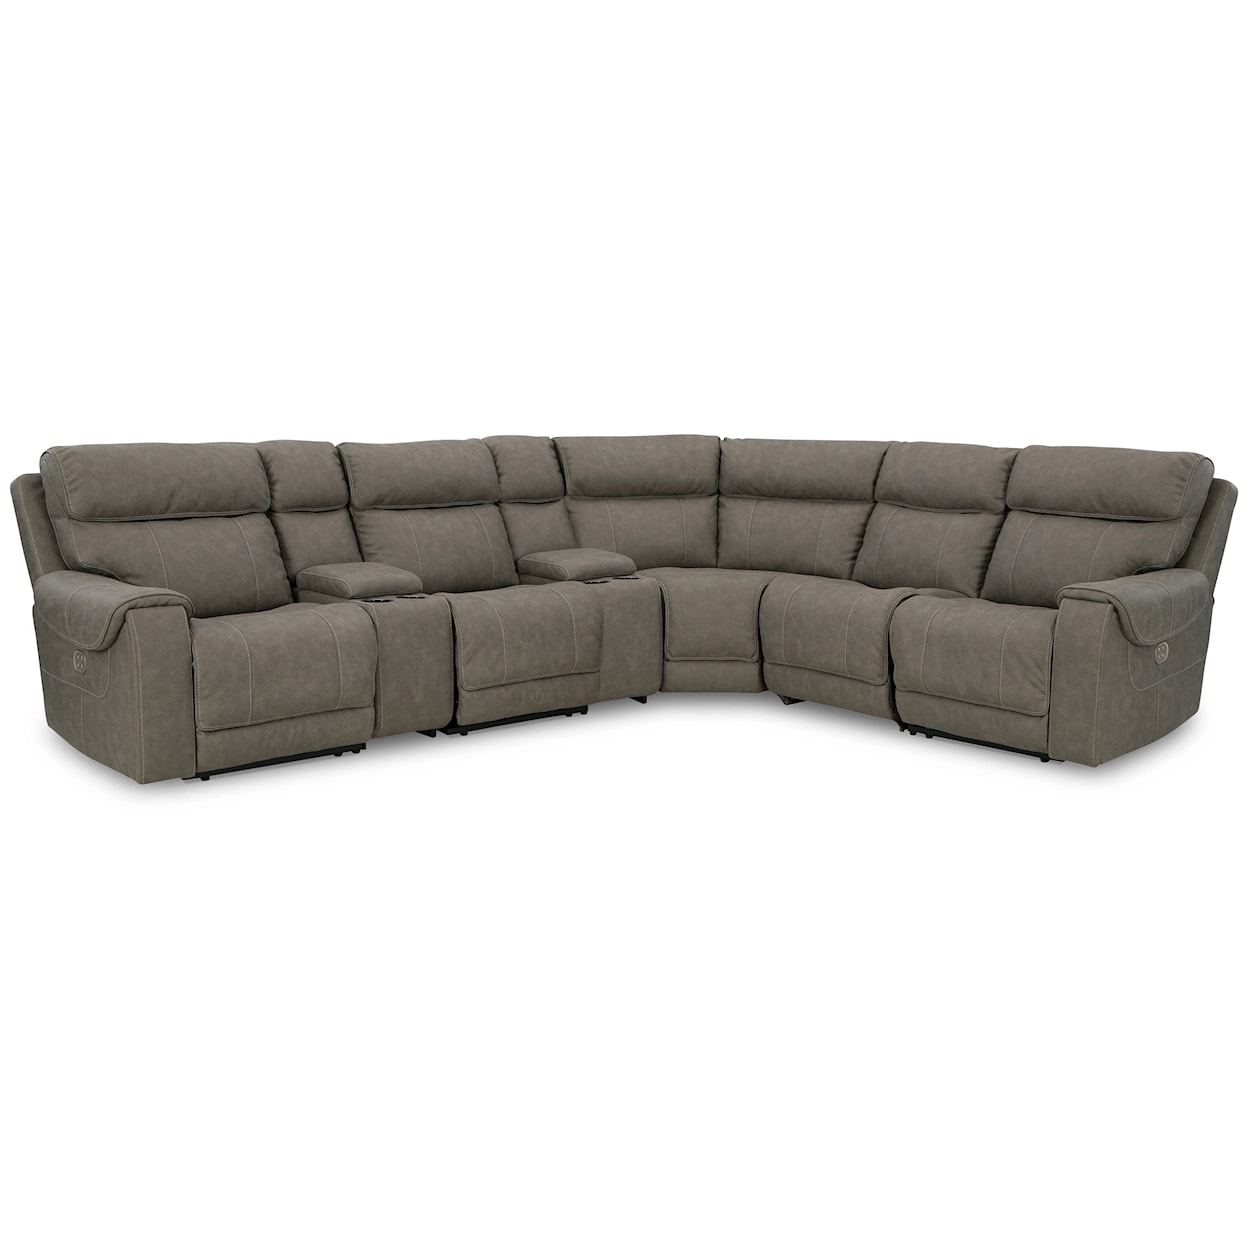 Benchcraft Starbot 7-Piece Power Reclining Sectional